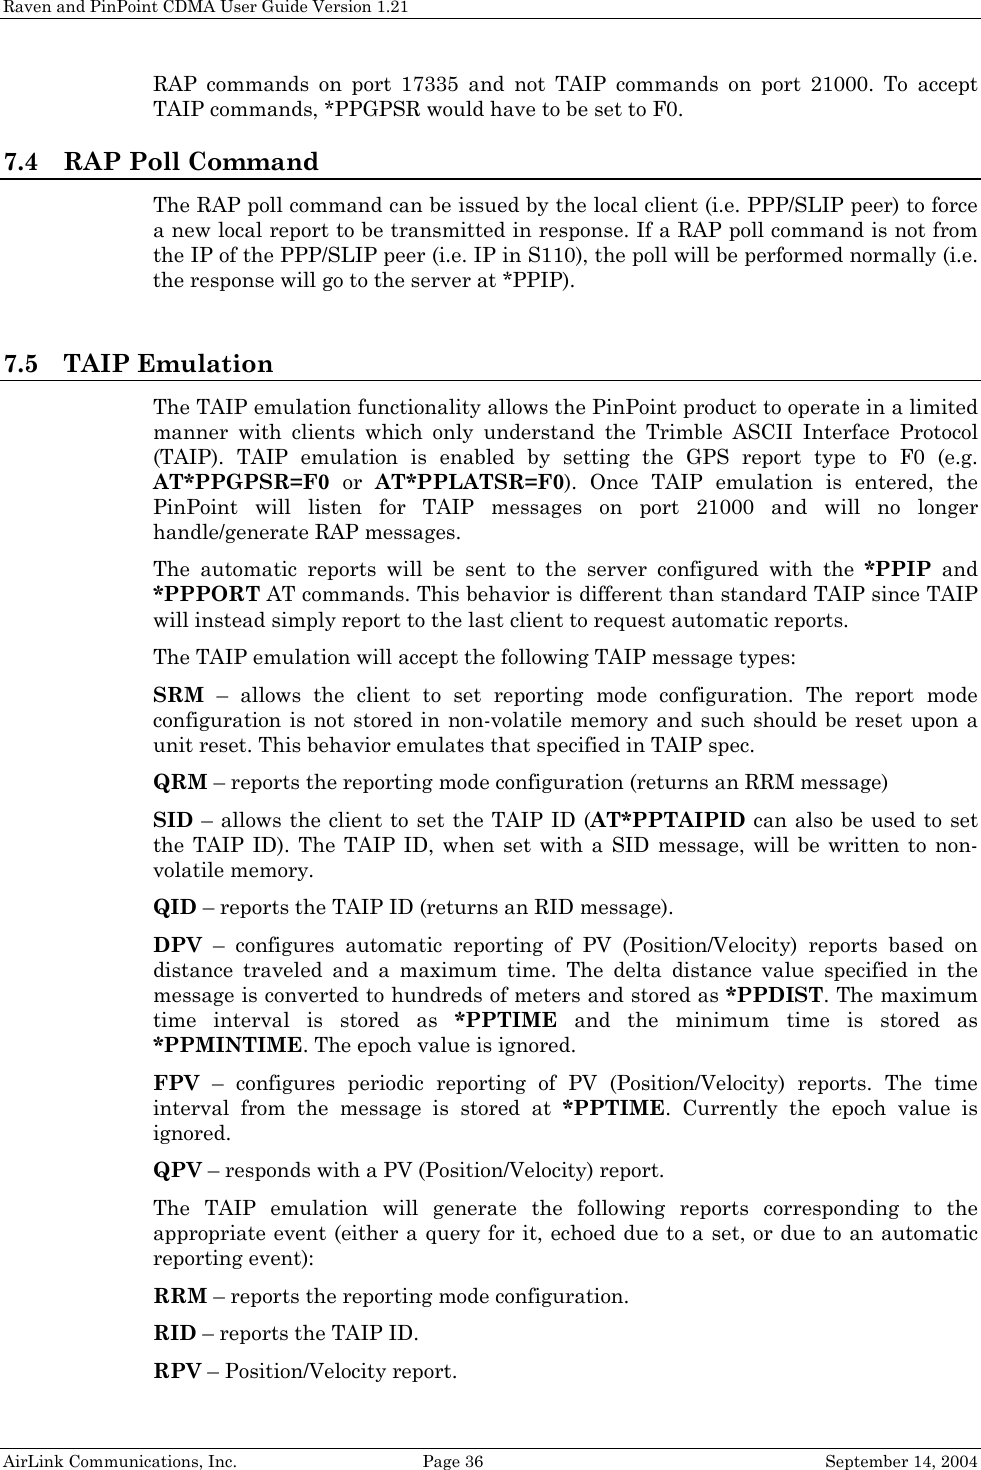 Raven and PinPoint CDMA User Guide Version 1.21 AirLink Communications, Inc.  Page 36  September 14, 2004 RAP commands on port 17335 and not TAIP commands on port 21000. To accept TAIP commands, *PPGPSR would have to be set to F0. 7.4 RAP Poll Command The RAP poll command can be issued by the local client (i.e. PPP/SLIP peer) to force a new local report to be transmitted in response. If a RAP poll command is not from the IP of the PPP/SLIP peer (i.e. IP in S110), the poll will be performed normally (i.e. the response will go to the server at *PPIP).   7.5 TAIP Emulation The TAIP emulation functionality allows the PinPoint product to operate in a limited manner with clients which only understand the Trimble ASCII Interface Protocol (TAIP). TAIP emulation is enabled by setting the GPS report type to F0 (e.g. AT*PPGPSR=F0  or  AT*PPLATSR=F0). Once TAIP emulation is entered, the PinPoint will listen for TAIP messages on port 21000 and will no longer handle/generate RAP messages.  The automatic reports will be sent to the server configured with the *PPIP and *PPPORT AT commands. This behavior is different than standard TAIP since TAIP will instead simply report to the last client to request automatic reports. The TAIP emulation will accept the following TAIP message types: SRM – allows the client to set reporting mode configuration. The report mode configuration is not stored in non-volatile memory and such should be reset upon a unit reset. This behavior emulates that specified in TAIP spec. QRM – reports the reporting mode configuration (returns an RRM message) SID – allows the client to set the TAIP ID (AT*PPTAIPID can also be used to set the TAIP ID). The TAIP ID, when set with a SID message, will be written to non-volatile memory. QID – reports the TAIP ID (returns an RID message). DPV – configures automatic reporting of PV (Position/Velocity) reports based on distance traveled and a maximum time. The delta distance value specified in the message is converted to hundreds of meters and stored as *PPDIST. The maximum time interval is stored as *PPTIME and the minimum time is stored as *PPMINTIME. The epoch value is ignored. FPV – configures periodic reporting of PV (Position/Velocity) reports. The time interval from the message is stored at *PPTIME. Currently the epoch value is ignored. QPV – responds with a PV (Position/Velocity) report. The TAIP emulation will generate the following reports corresponding to the appropriate event (either a query for it, echoed due to a set, or due to an automatic reporting event): RRM – reports the reporting mode configuration. RID – reports the TAIP ID. RPV – Position/Velocity report.  